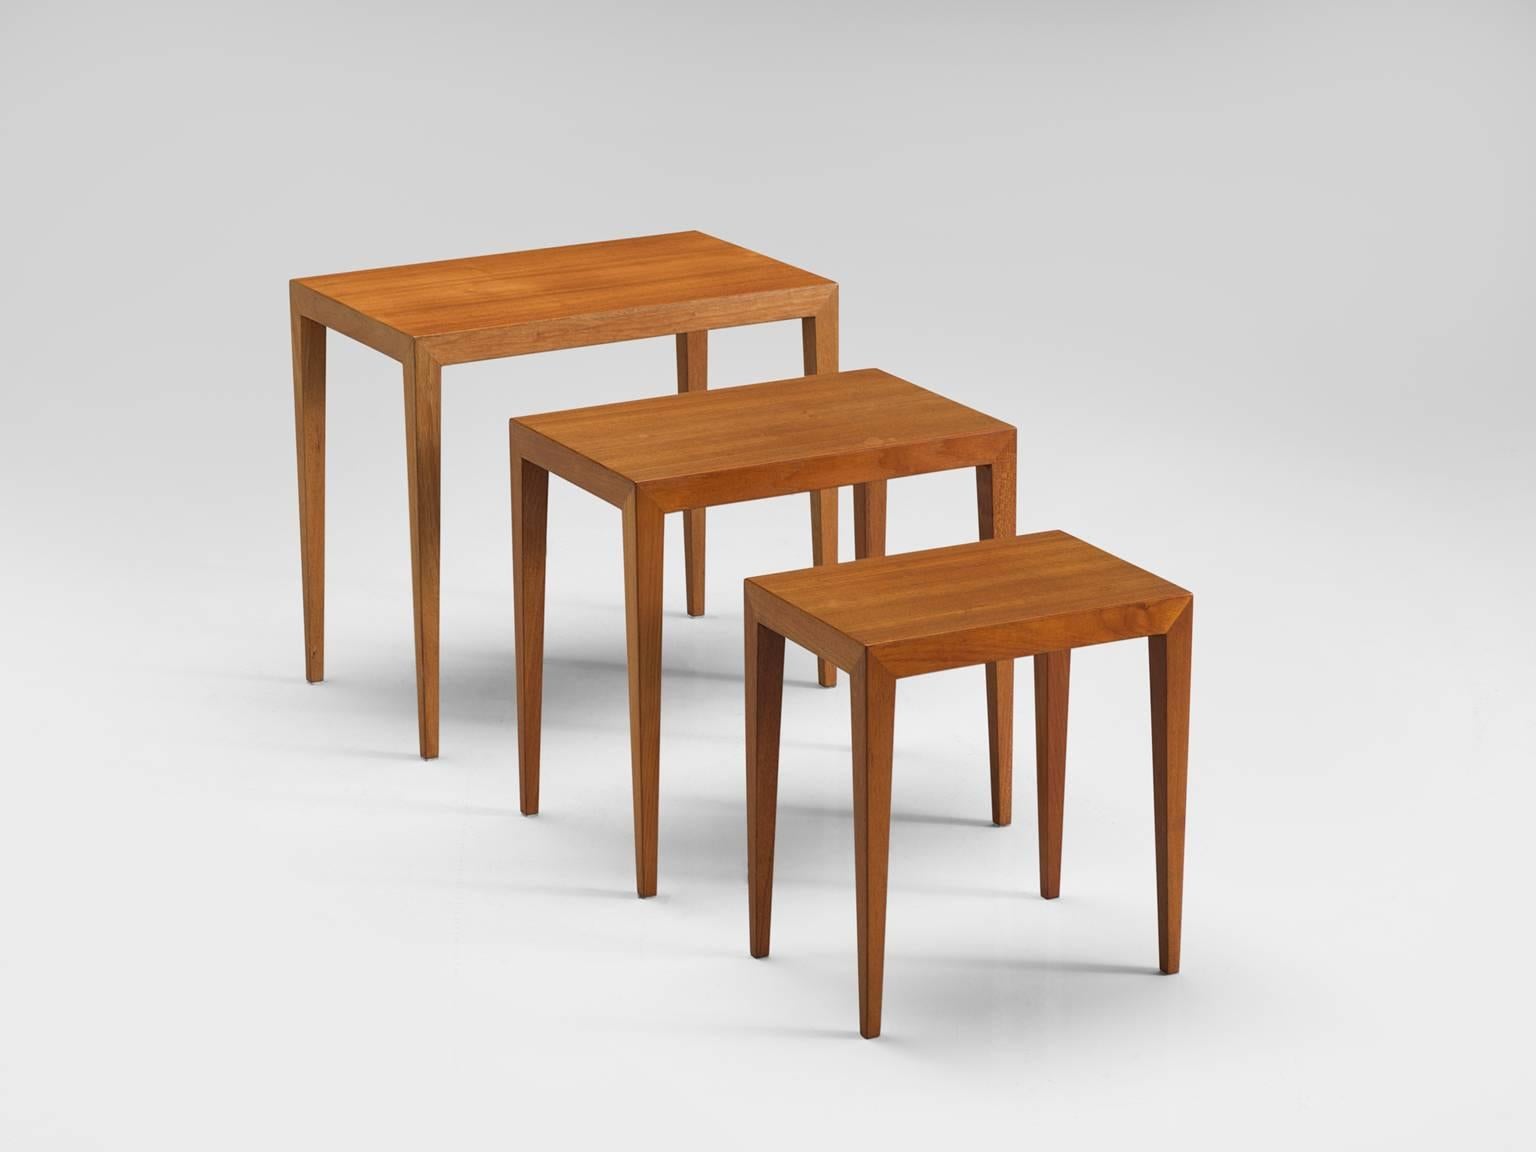 Severin Hansen, nesting tables 'model C-38-6', teak, Denmark, 1950s

These clean, modest and simple nesting tables feature rectangular tops with tapering legs. Very Danish, both in their aesthetics as in their construction. Well-constructed,